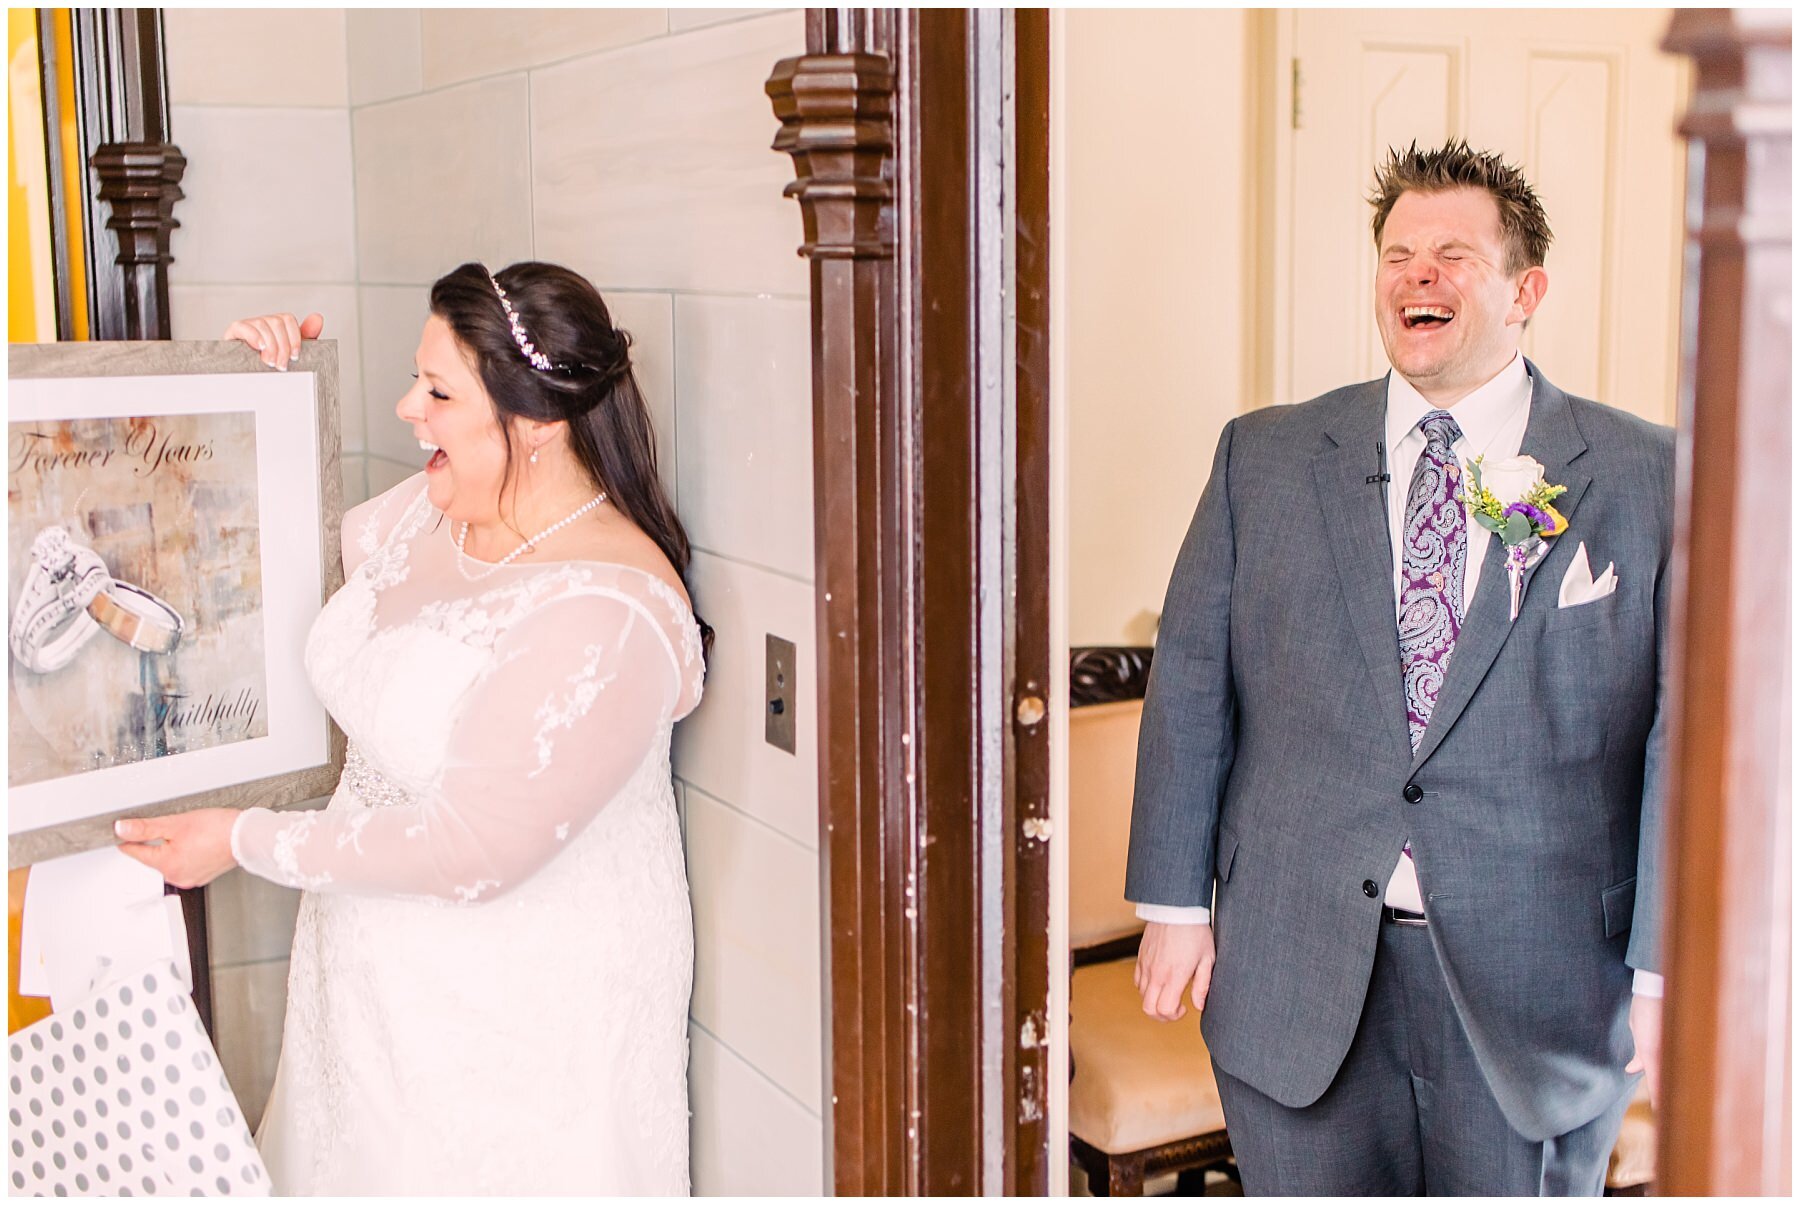 a bride and groom laughing before their wedding at fowler house mansion holding a picture of their wedding bands